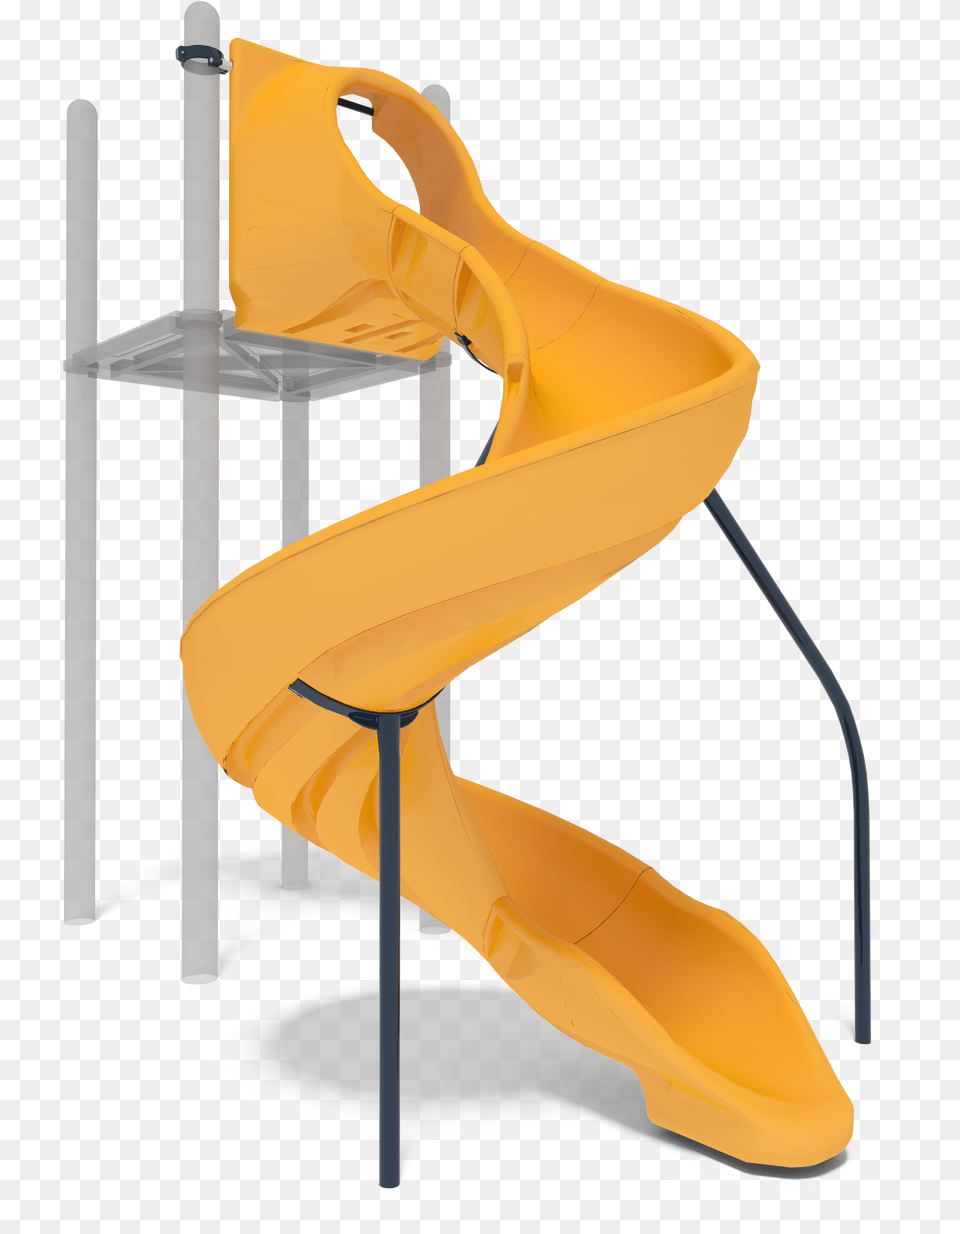 Slide, Toy, Outdoors, Play Area Png Image